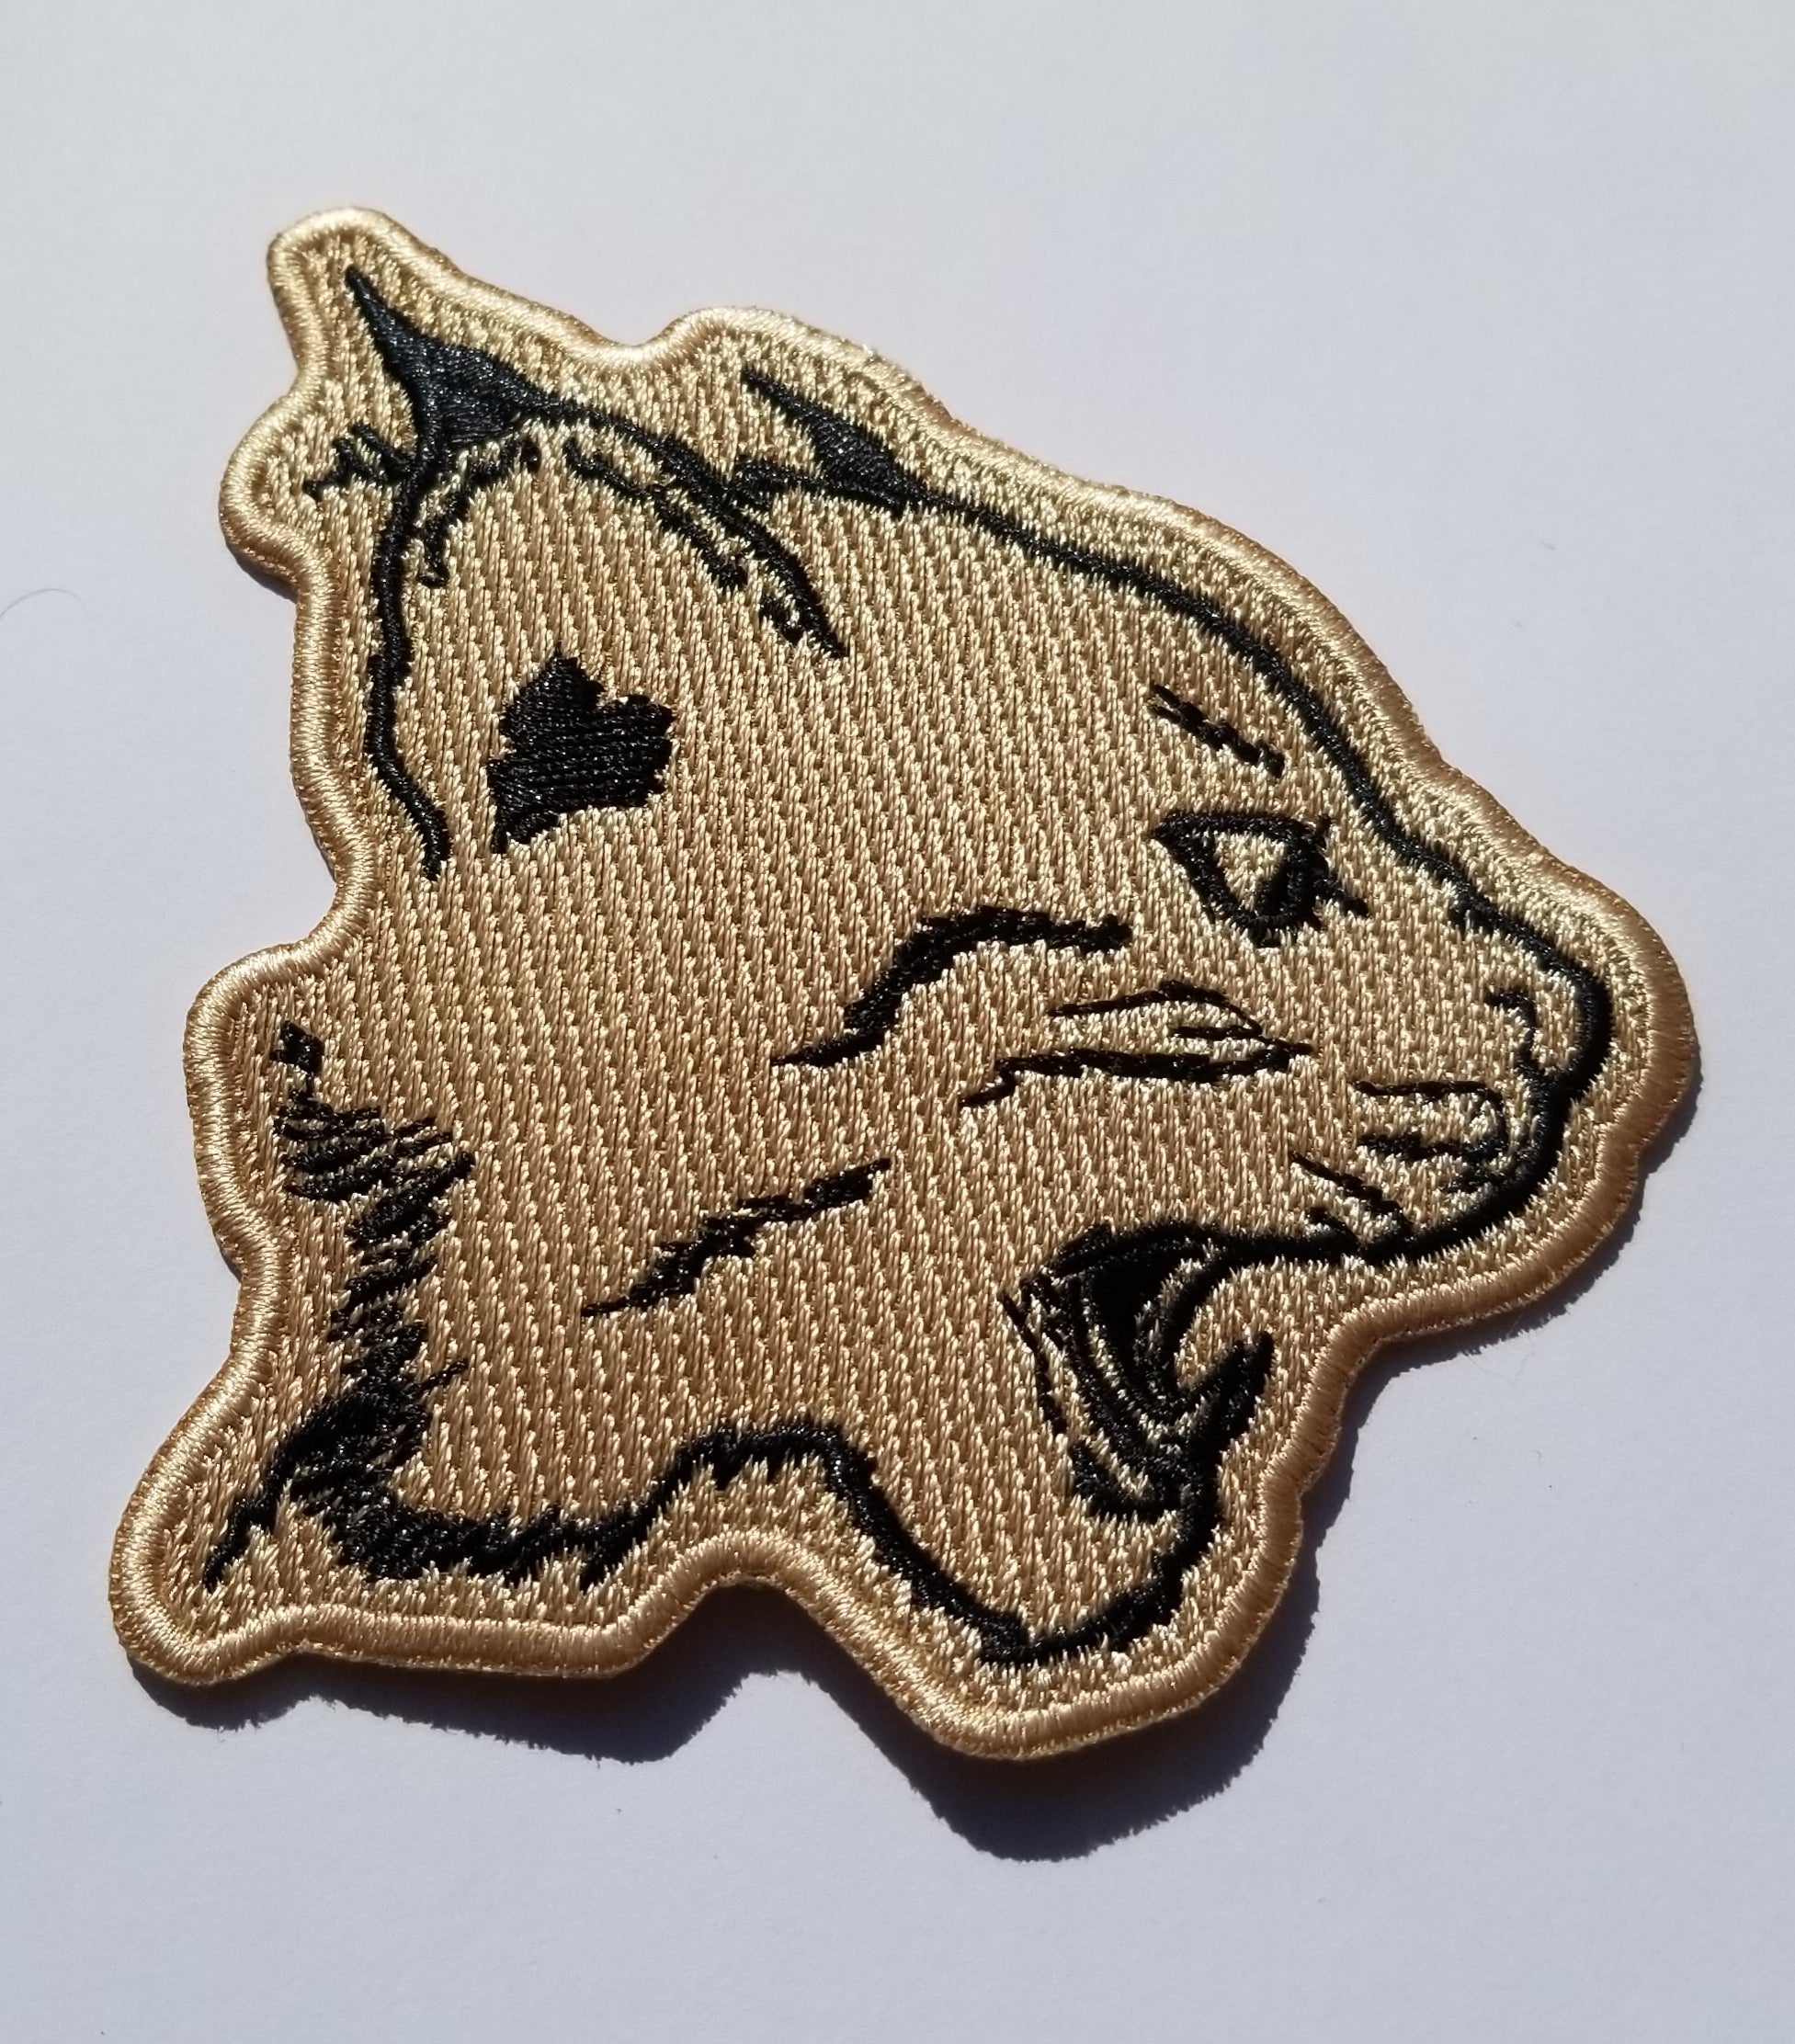 3.5in Custom Embroidered Patch - Velcro